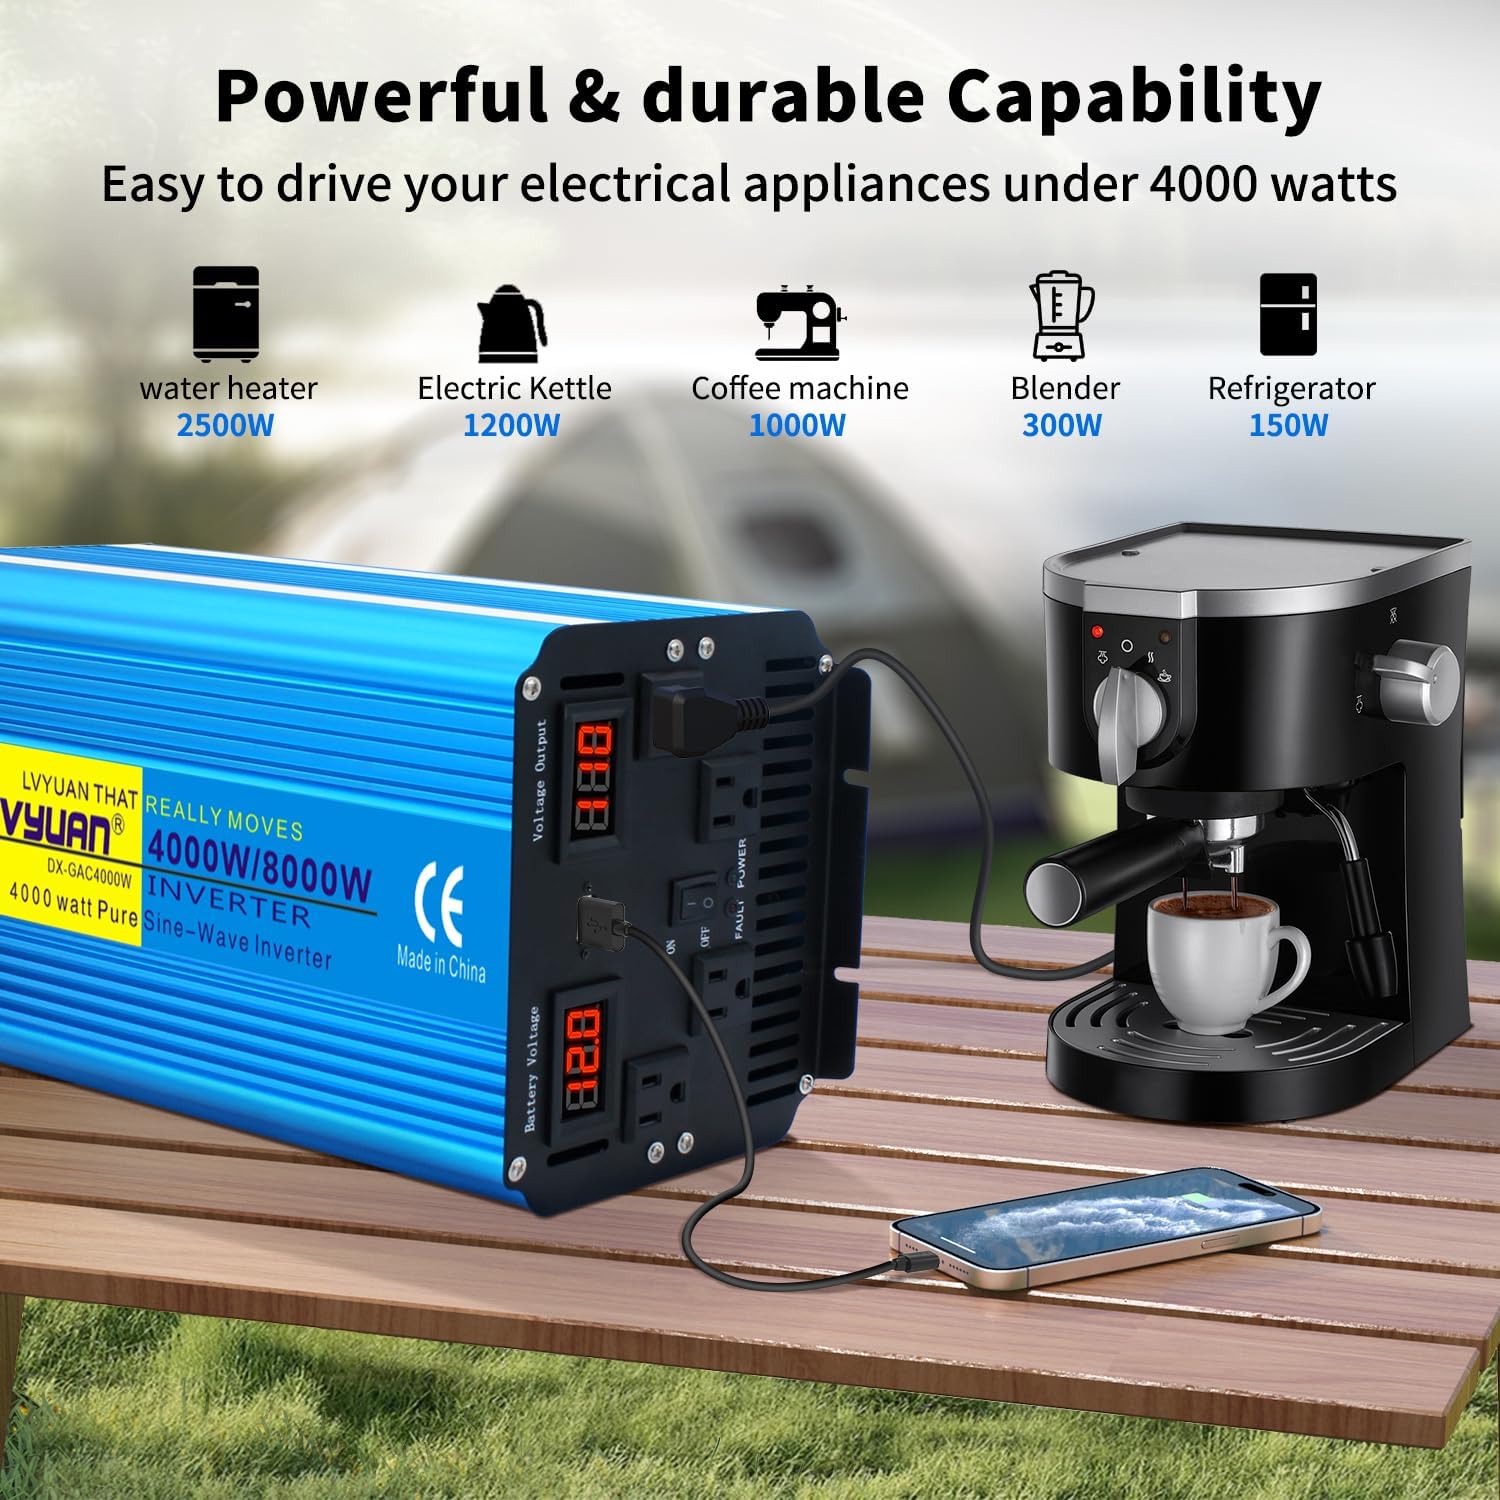 Professional title: "4000W Pure Sine Wave Power Inverter - 12V DC to AC 110V-120V Converter for Family Vehicle, RV, Truck, Solar System - Ideal for Road Trips, Camping, Emergencies - Includes 4 AC Charger Outlets, LED Display, and Remote Controller"